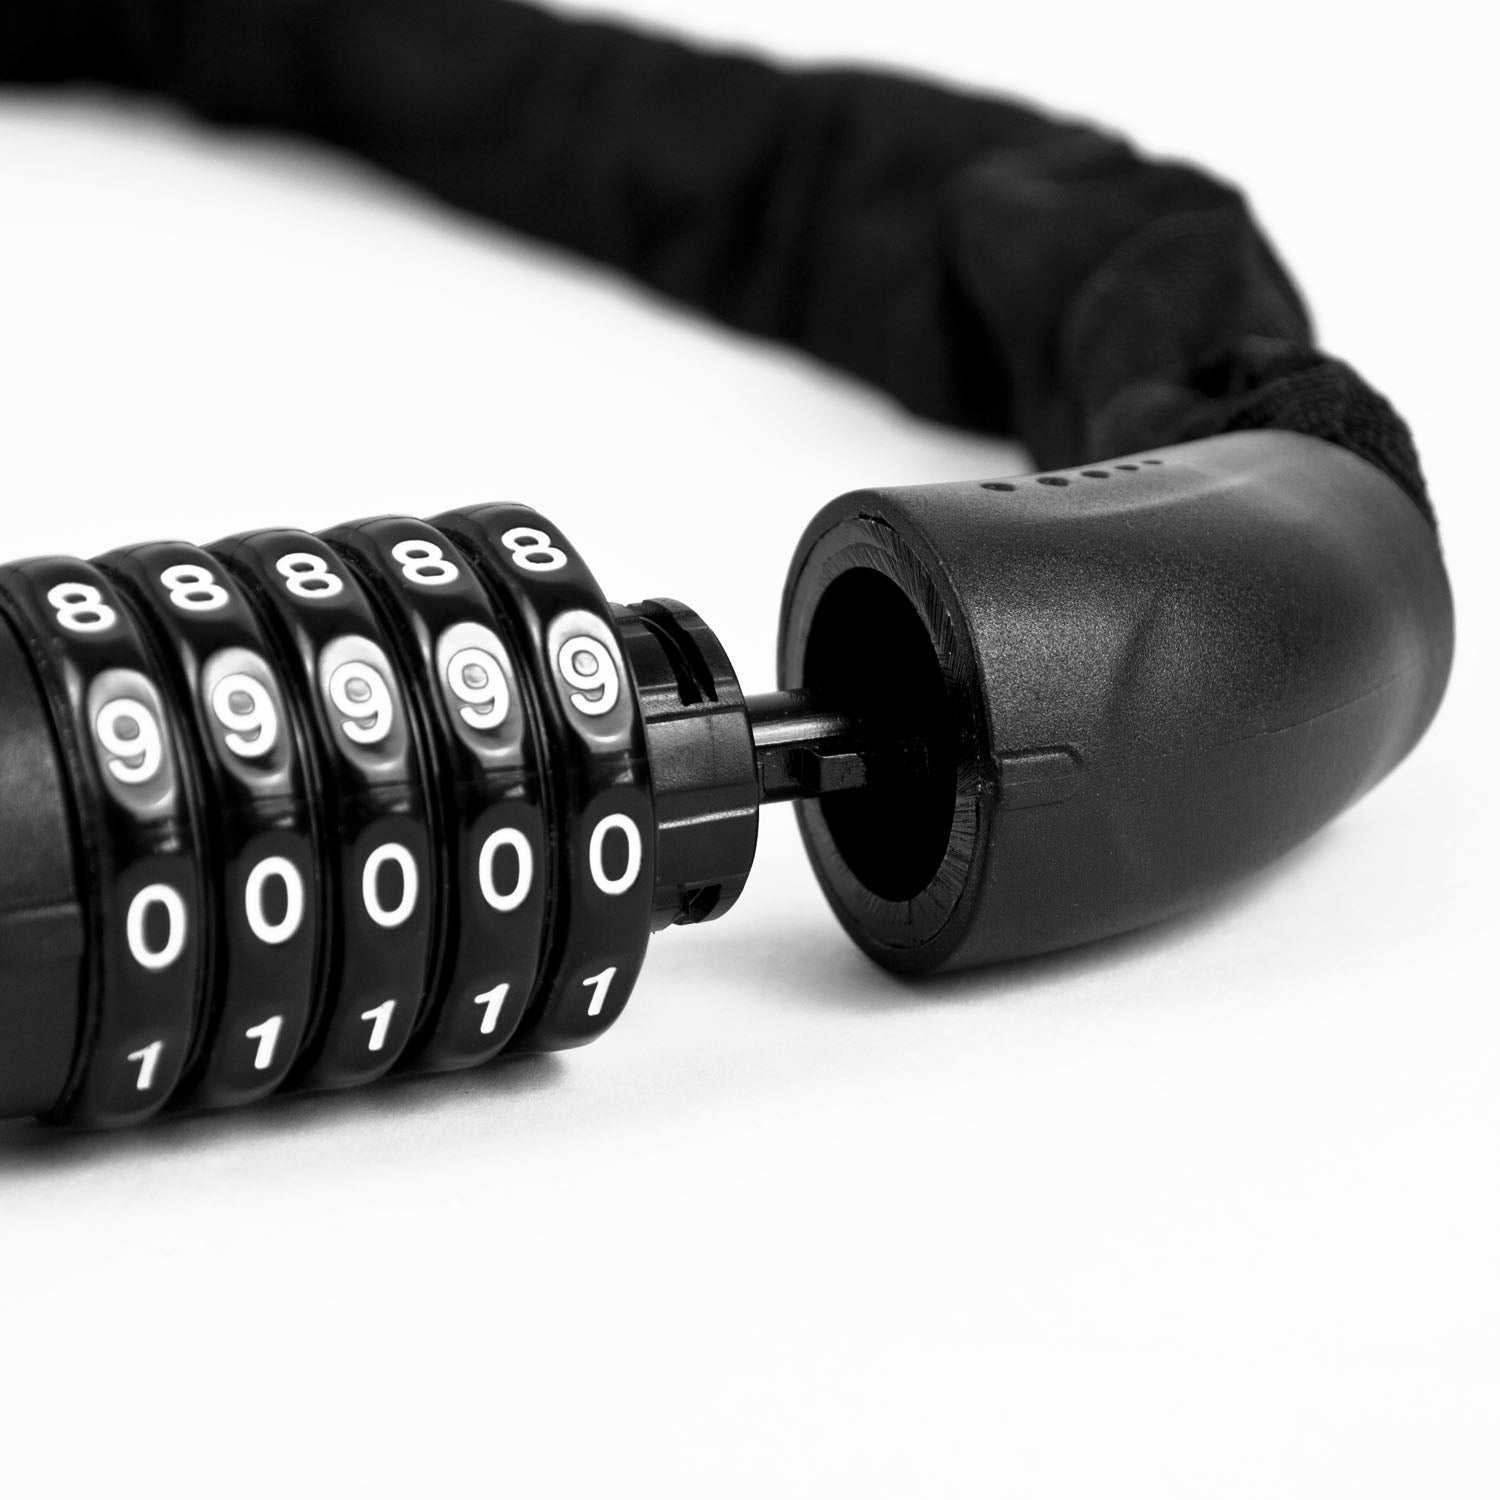 5 Digit Bicycle Chain Lock - Inspirely